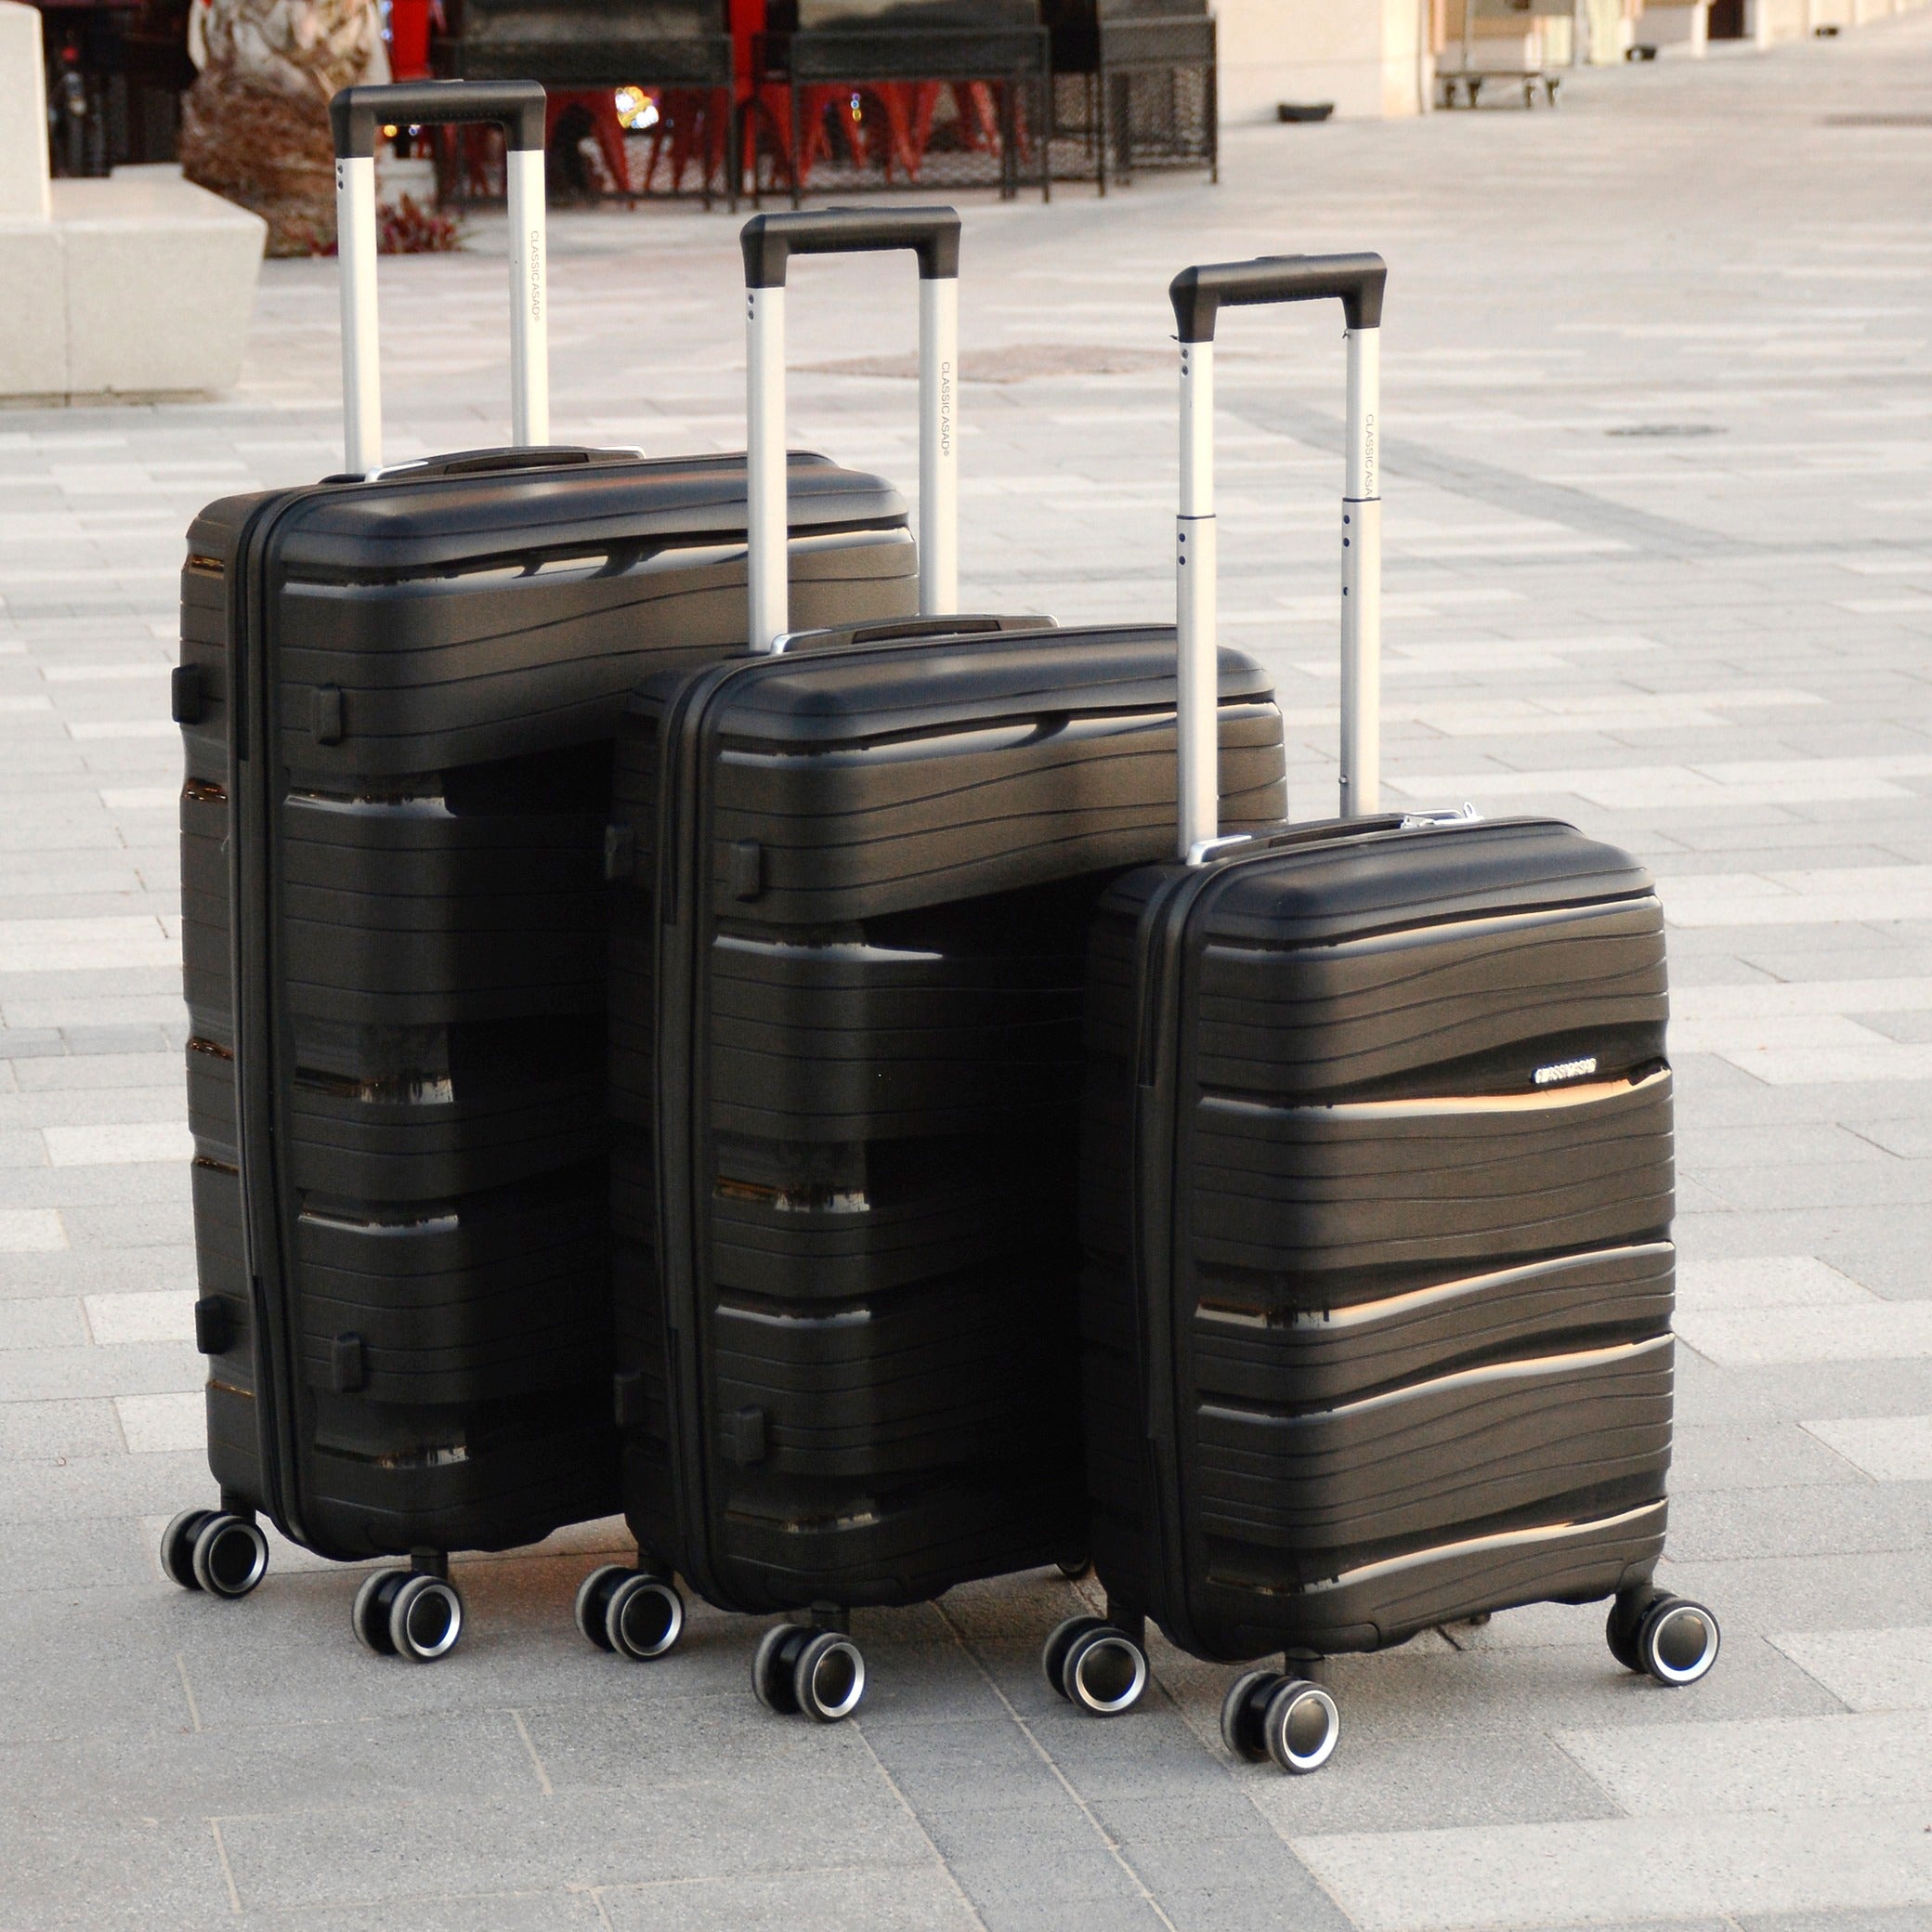 PP material Luggage | hard case trolley bag | Lightweight | 3 Pcs Set 20”24” 28”inches | 3 years warranty | PP Black | AMPPMLBK